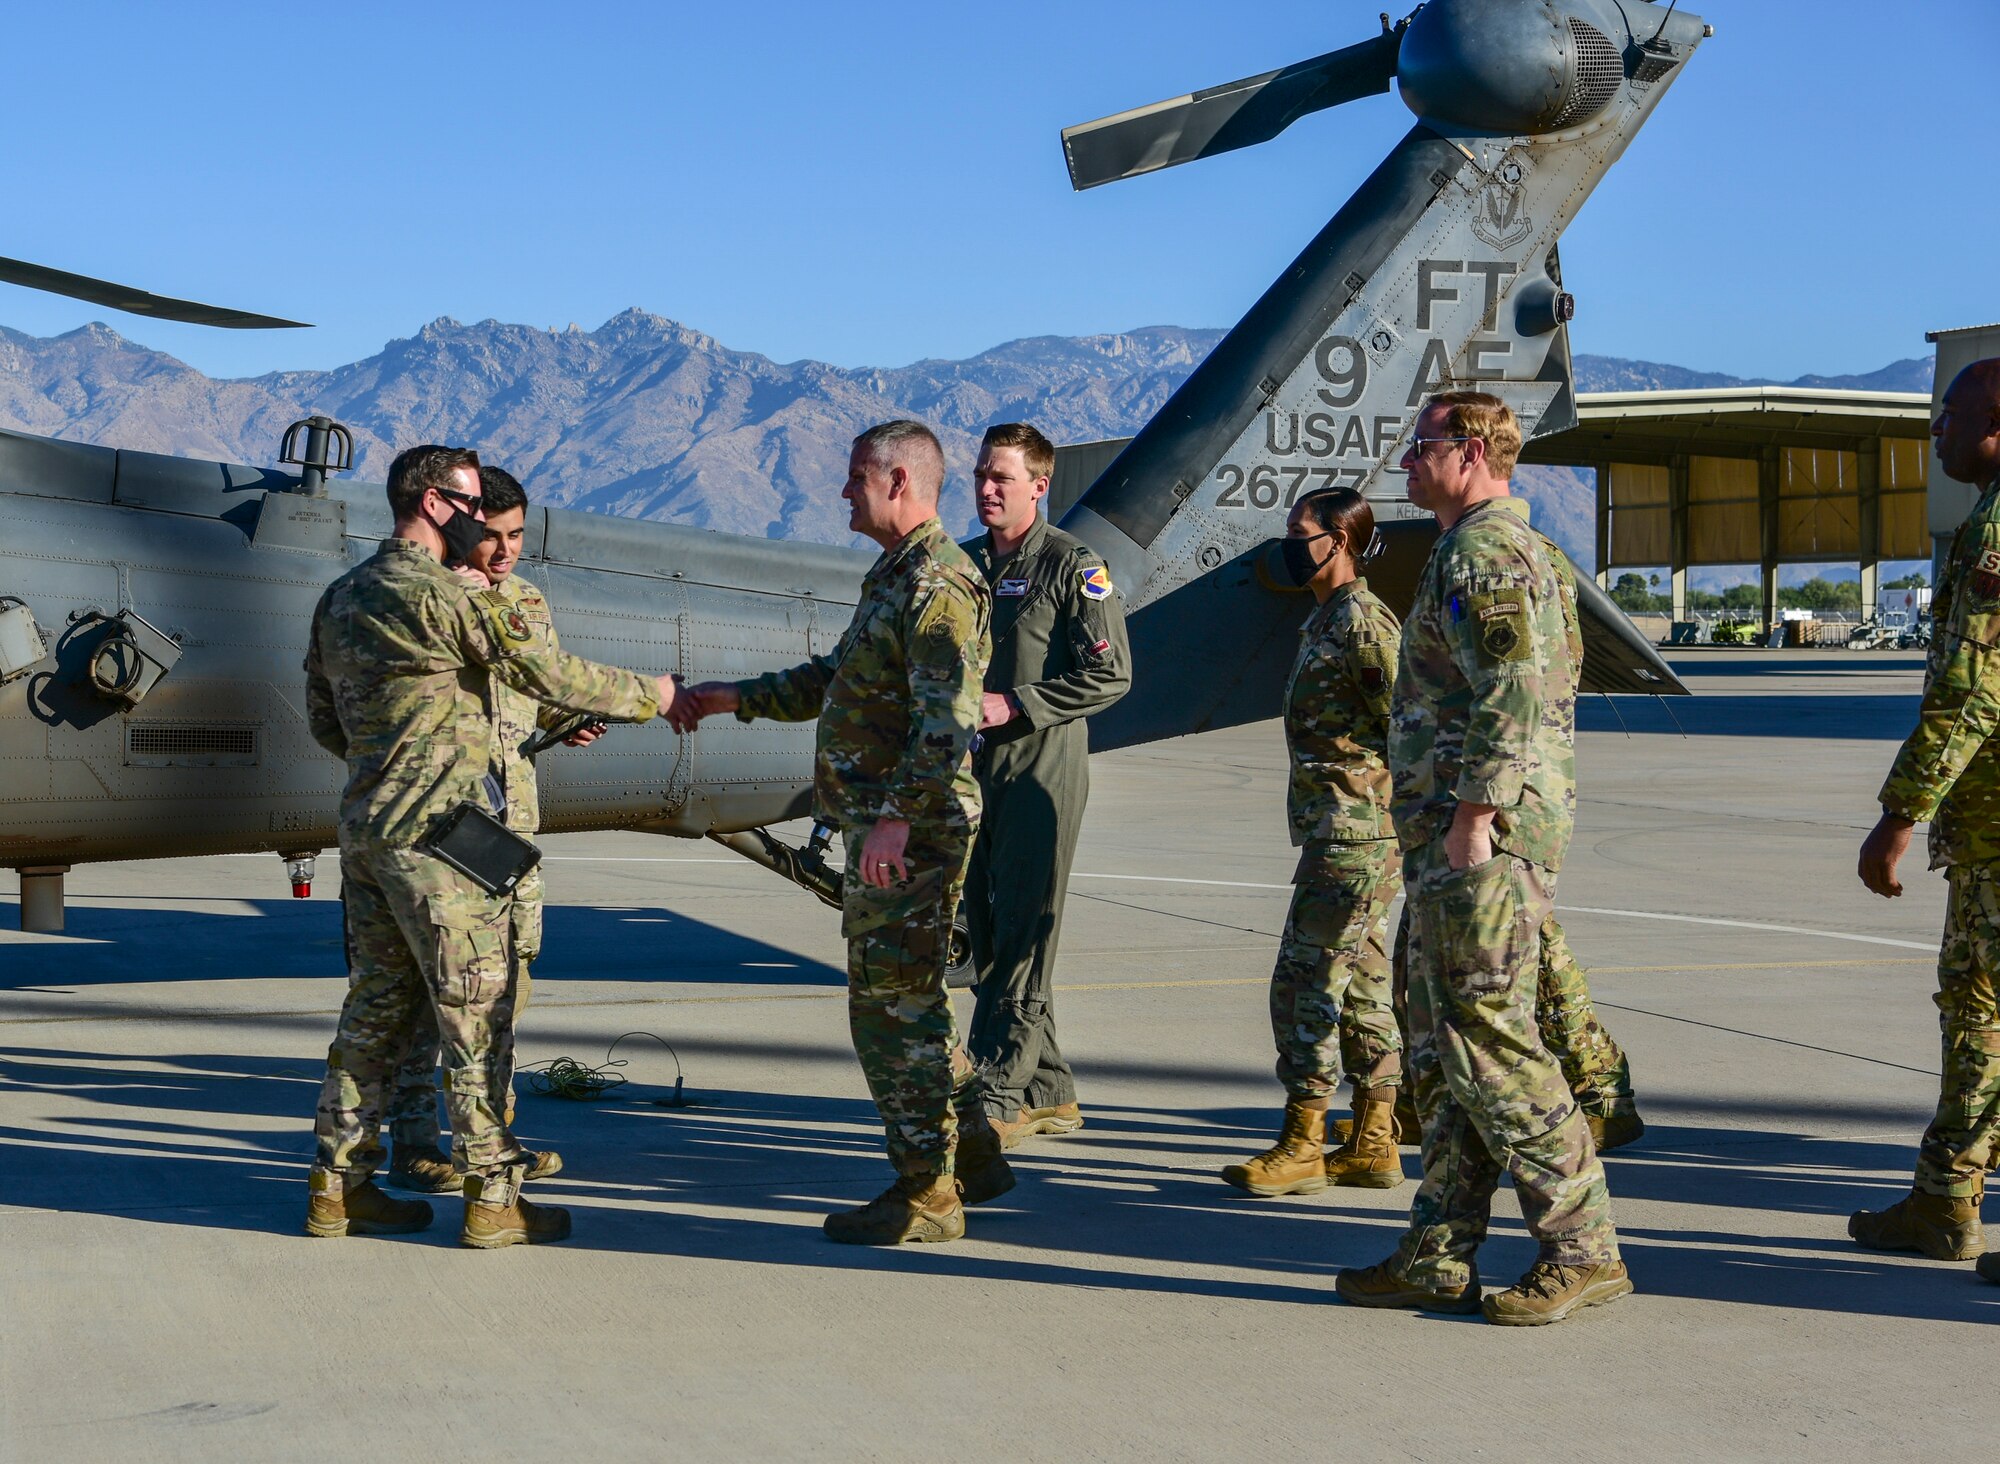 A photo of Airmen meeting and shaking hands.